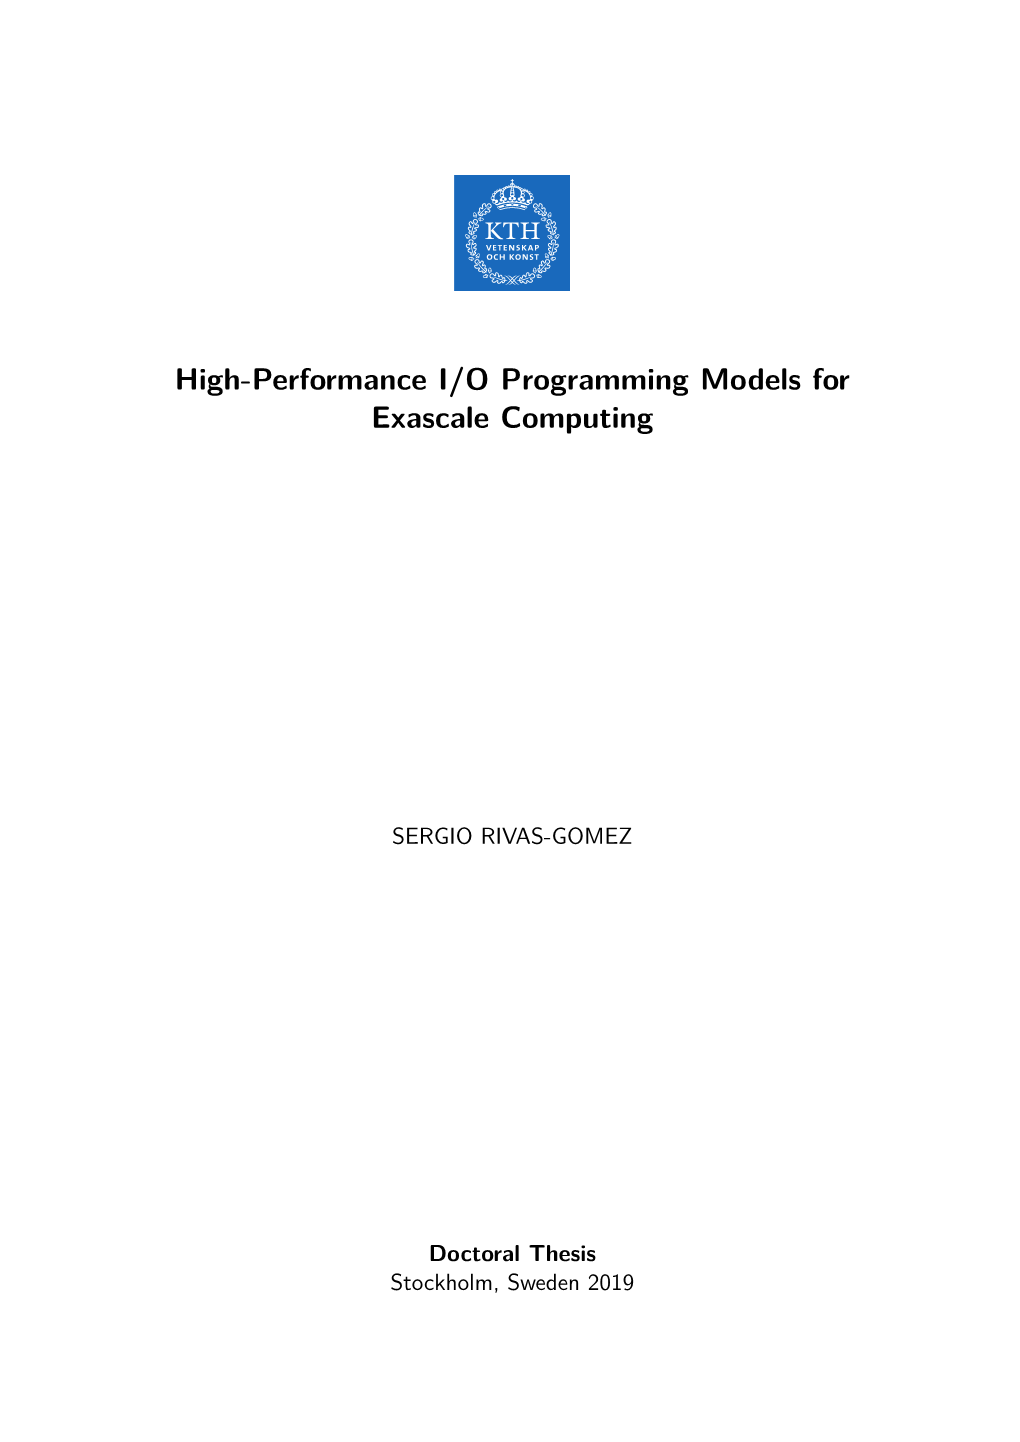 High-Performance I/O Programming Models for Exascale Computing